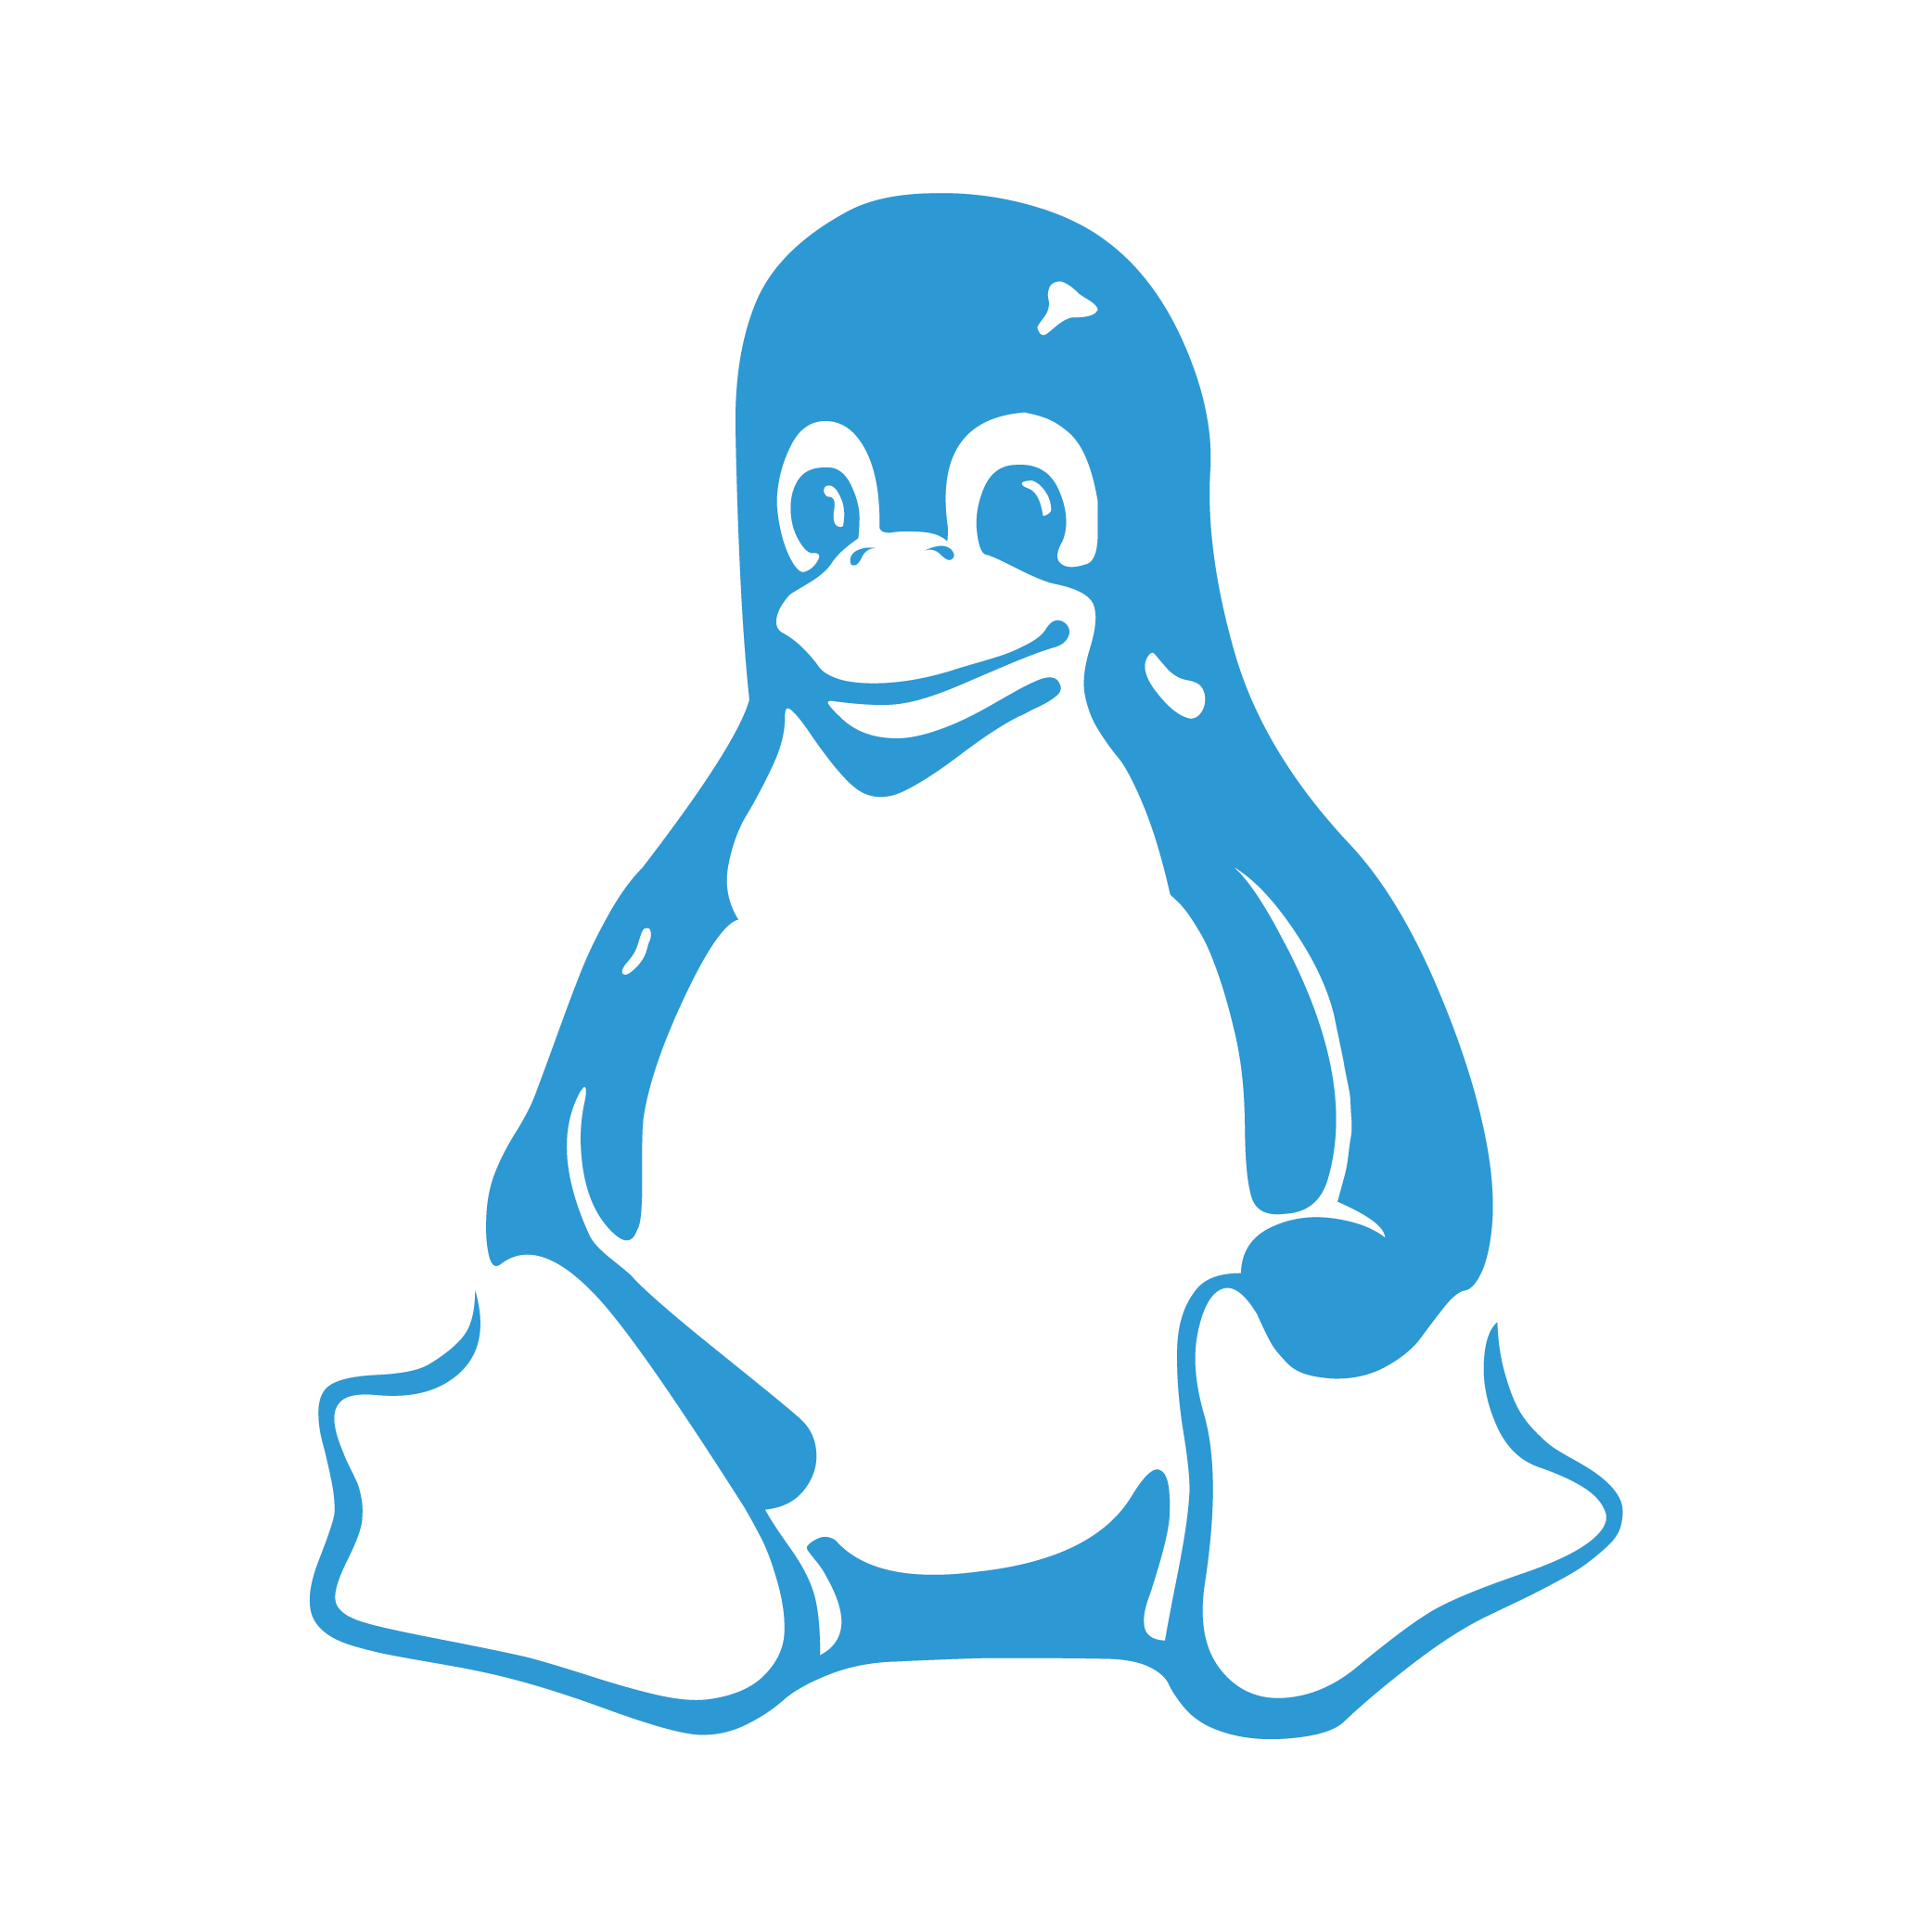 Linux operating systems